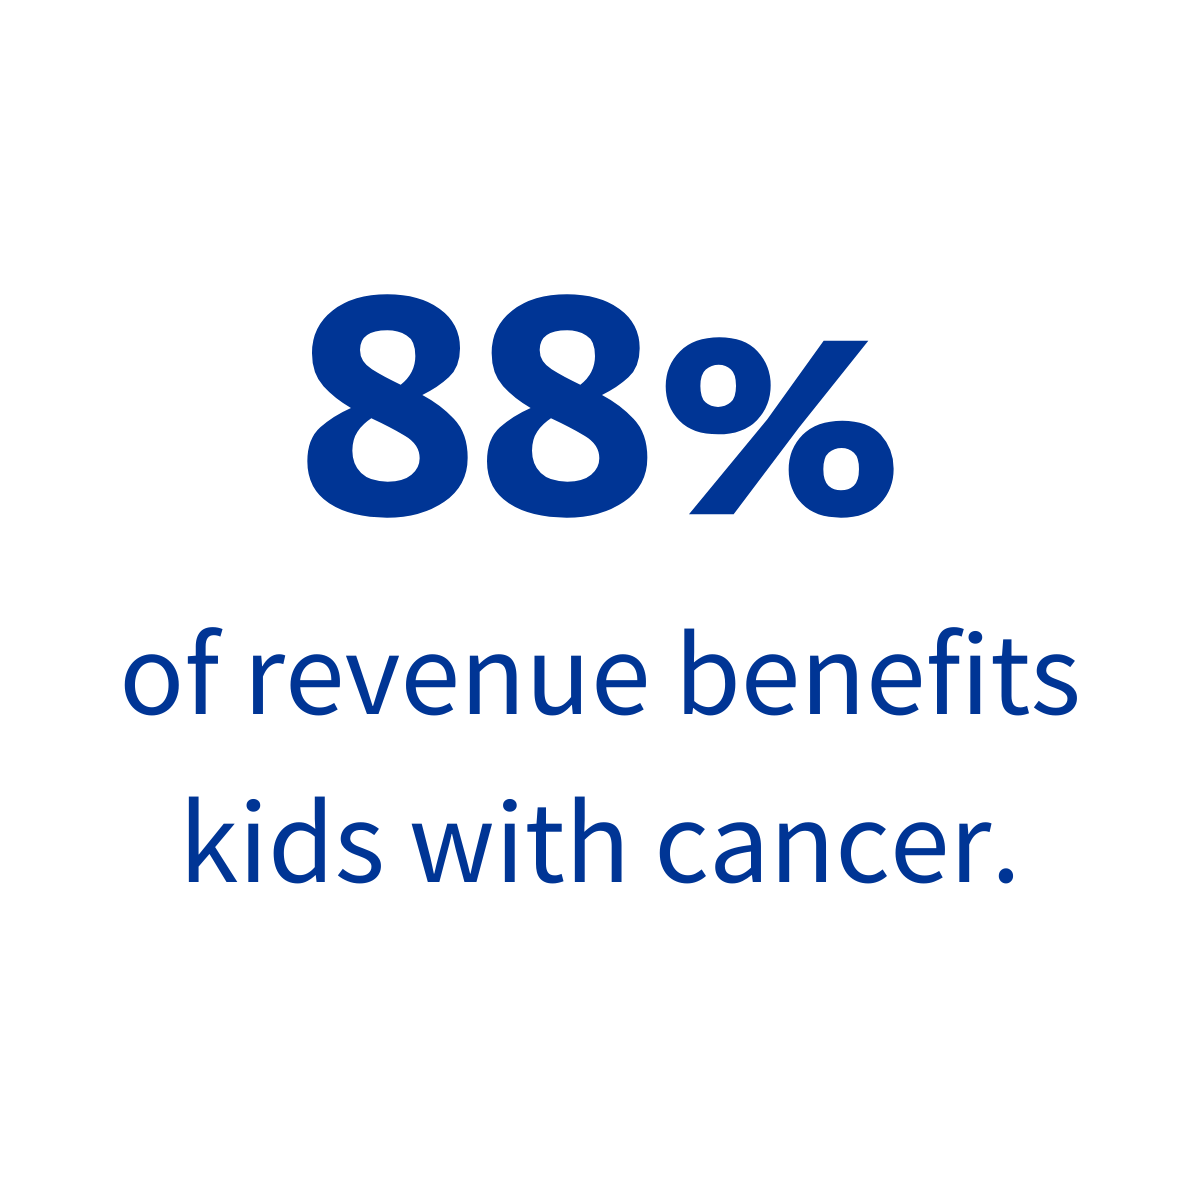 88% of revenue benefits kids with cancer